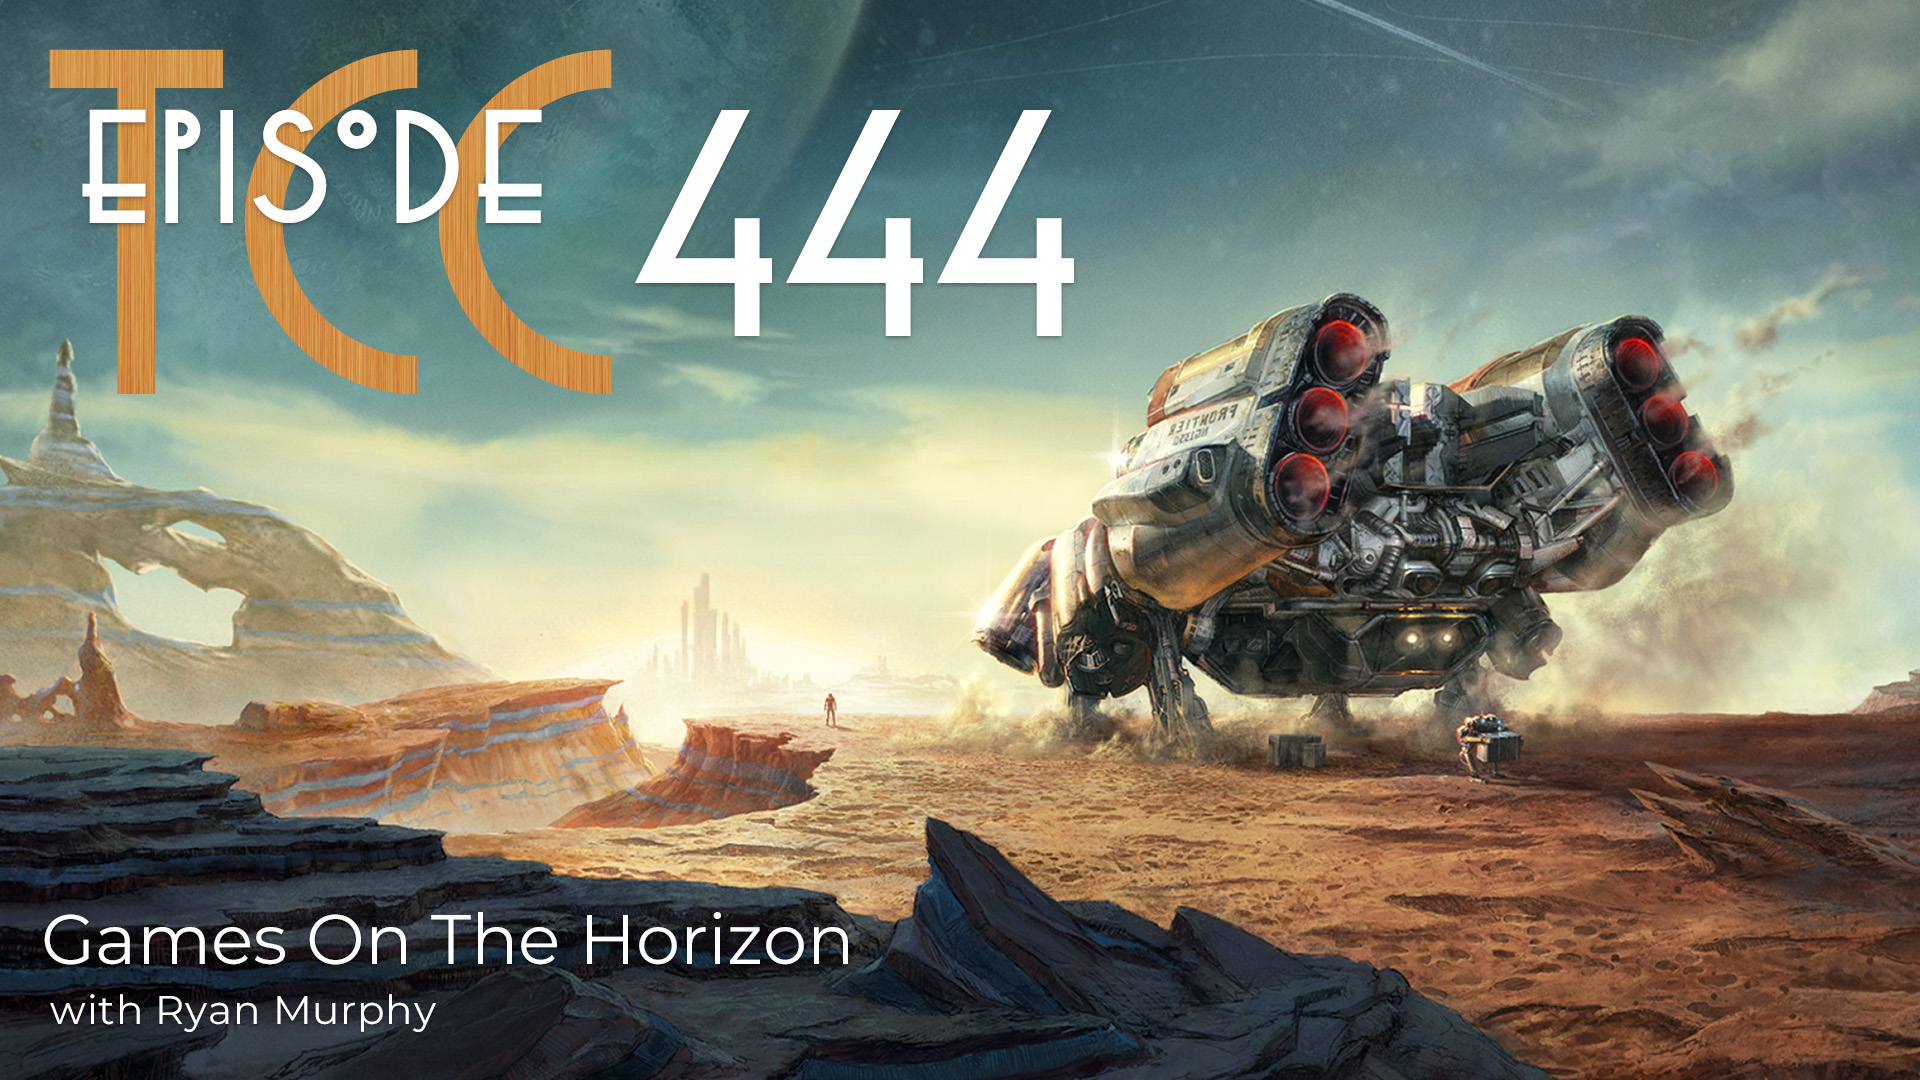 The Citadel Cafe 444: Games On The Horizon